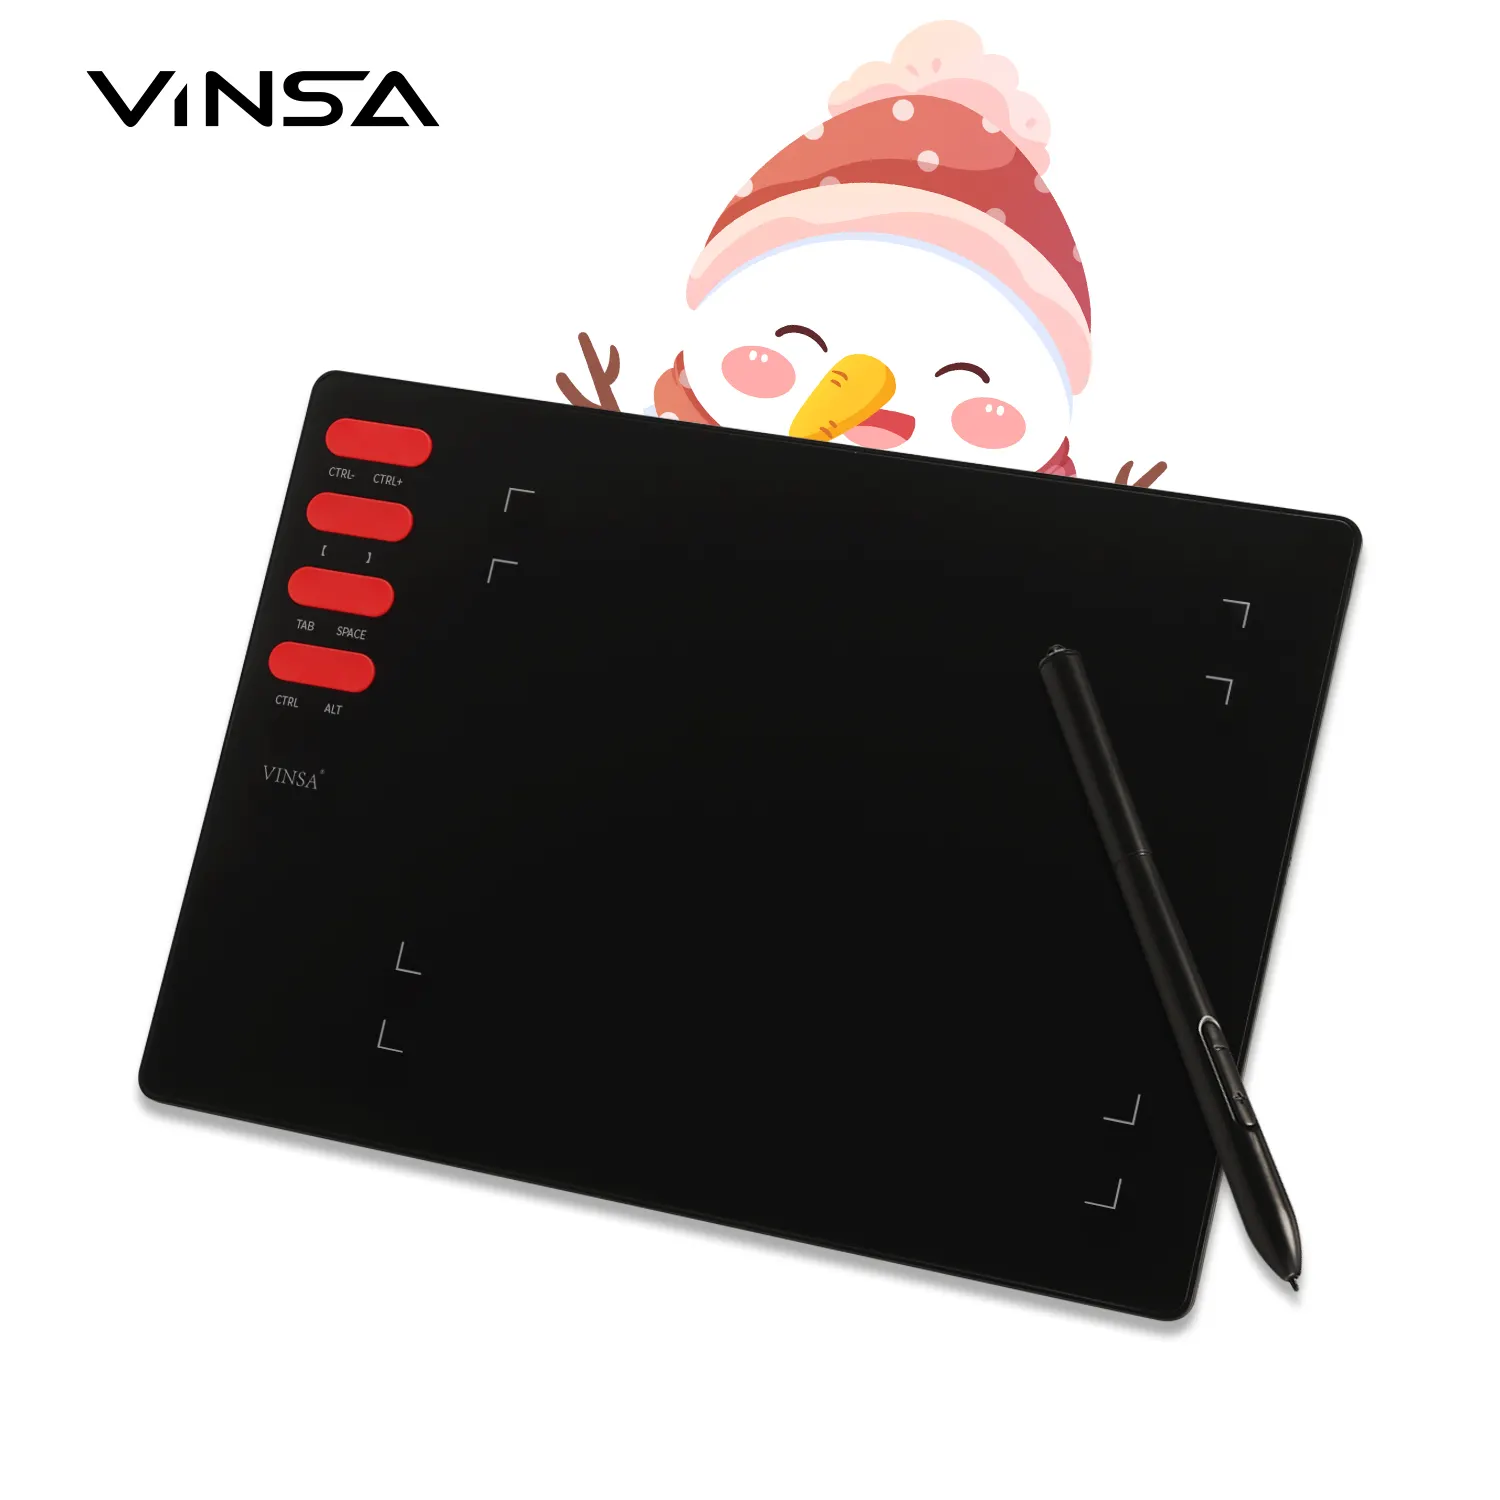 VINSA T505 Graphic Tablet Drawing Pad With Digital Pen 8 Hot Keys For Teacher Battery-Free Stylus Interactive Drawing Table